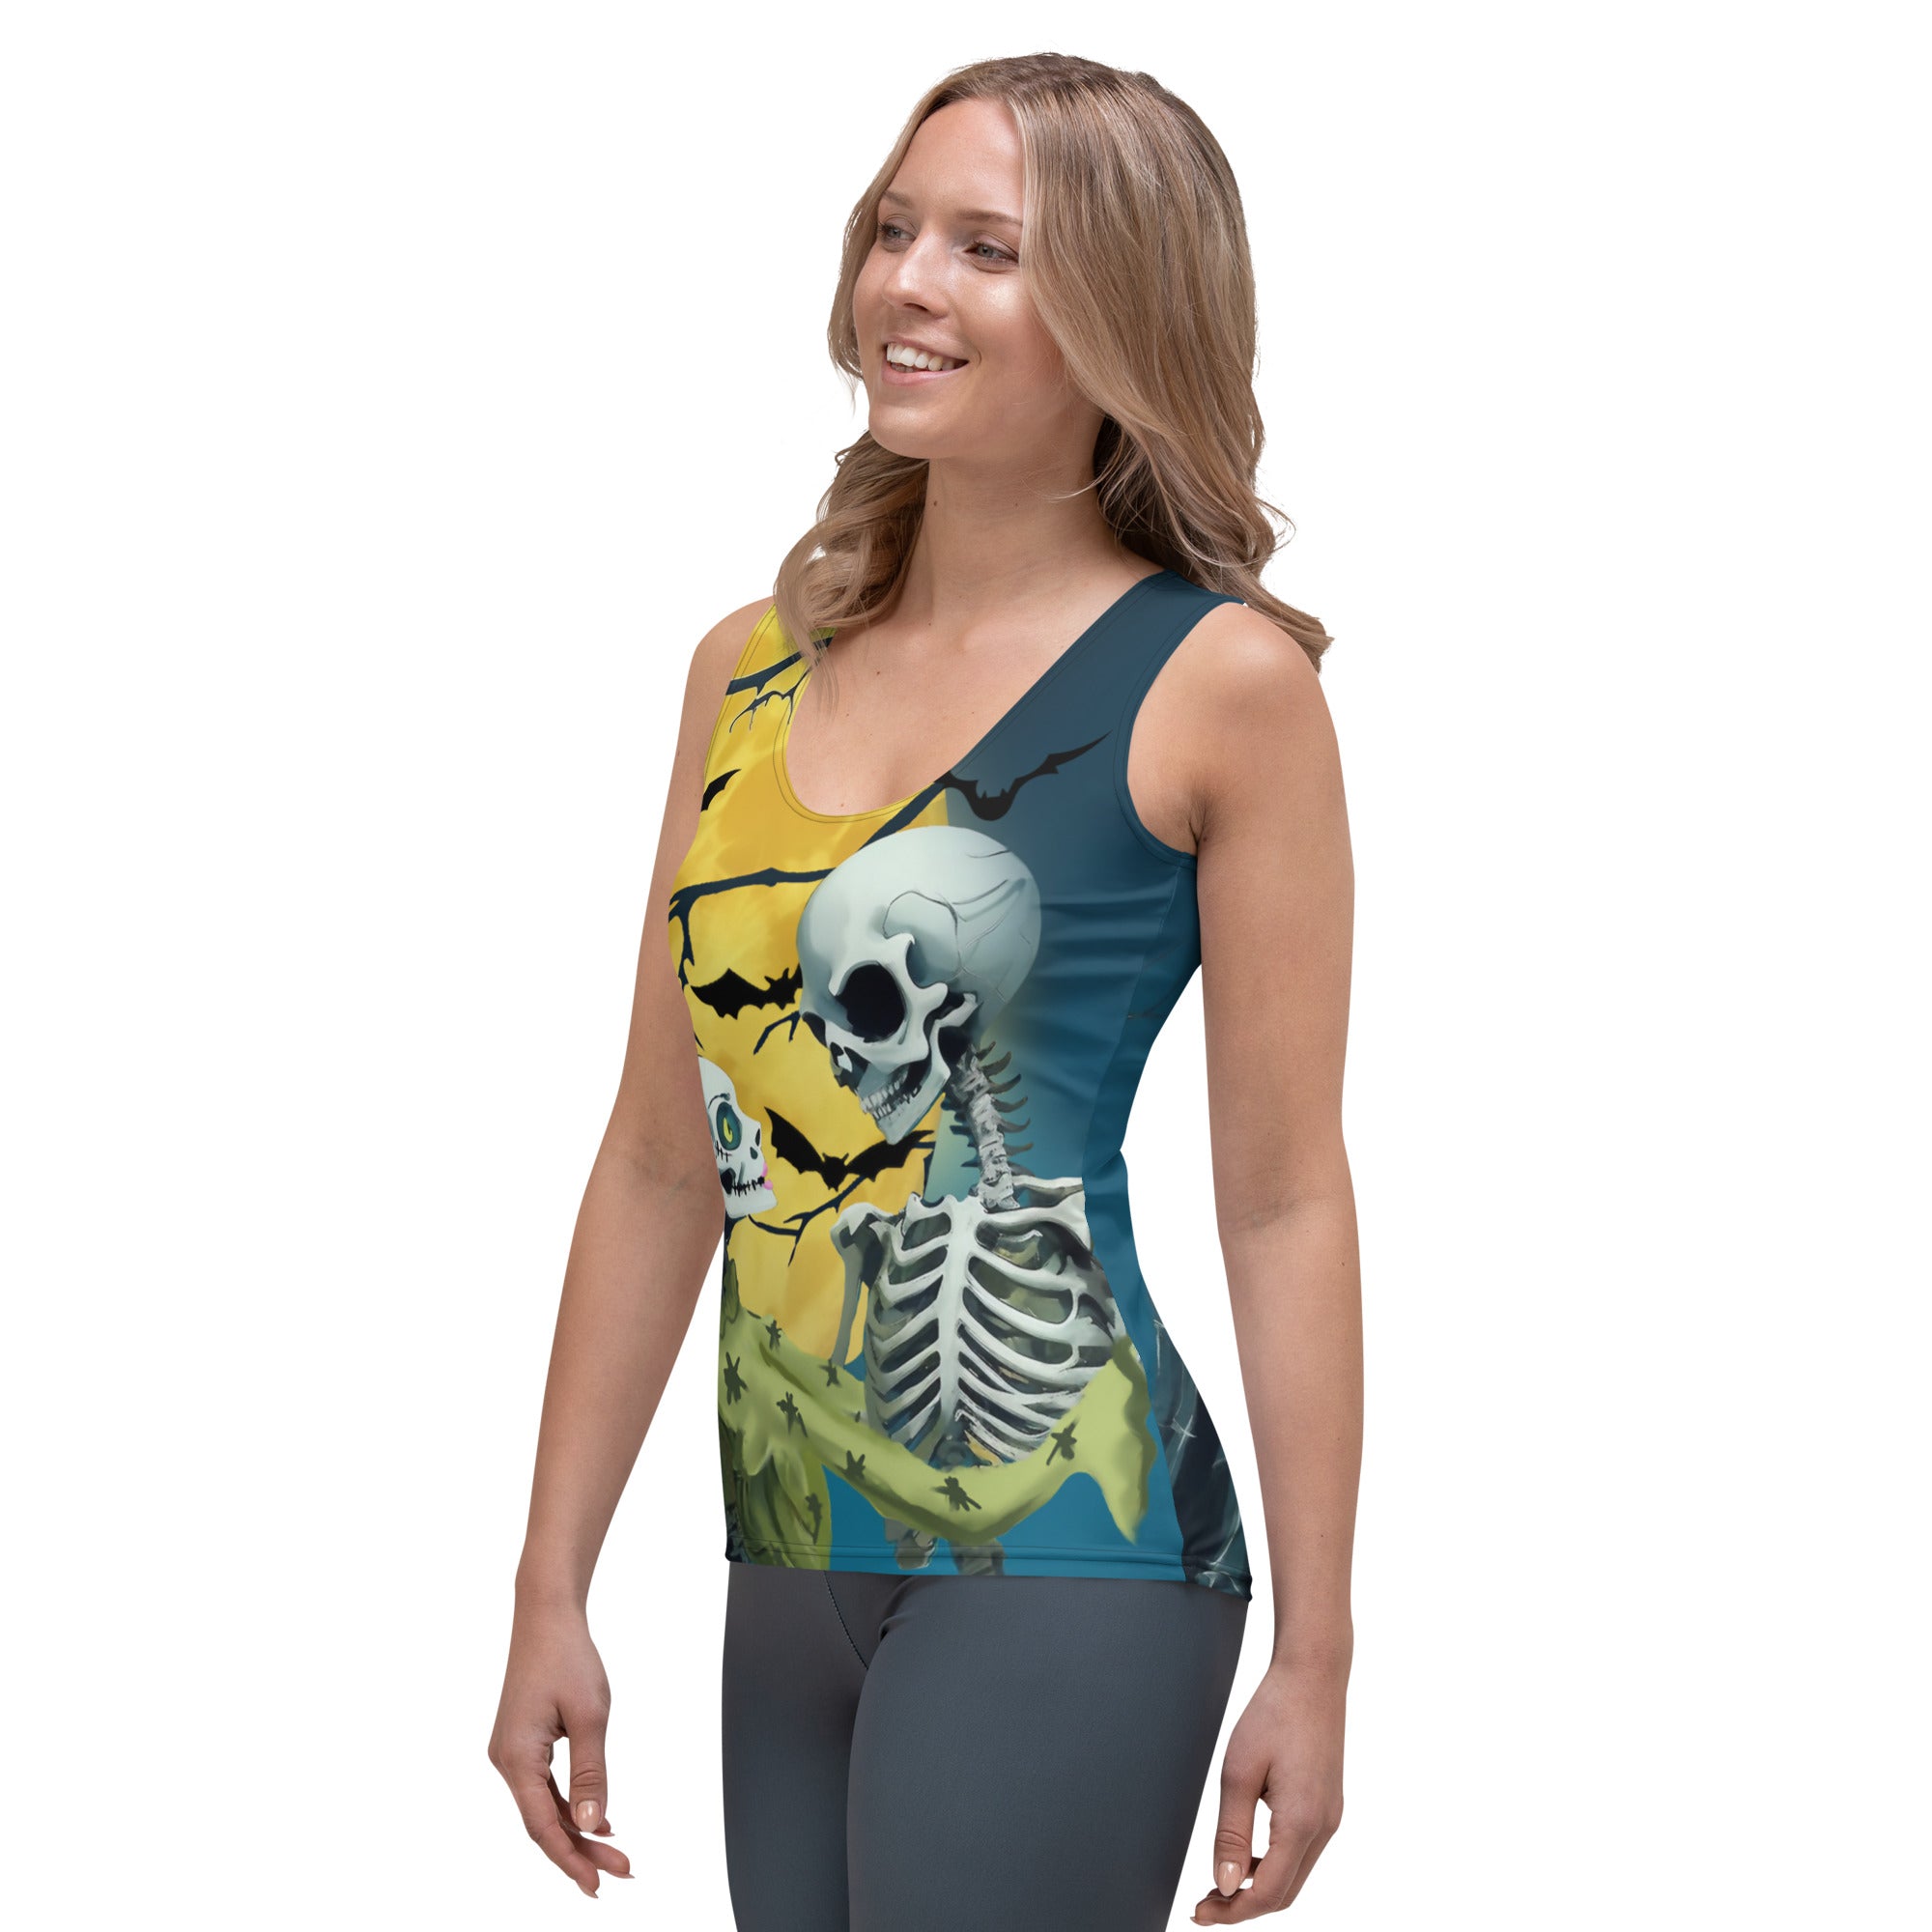 Skeleton and Zombie Tank Top